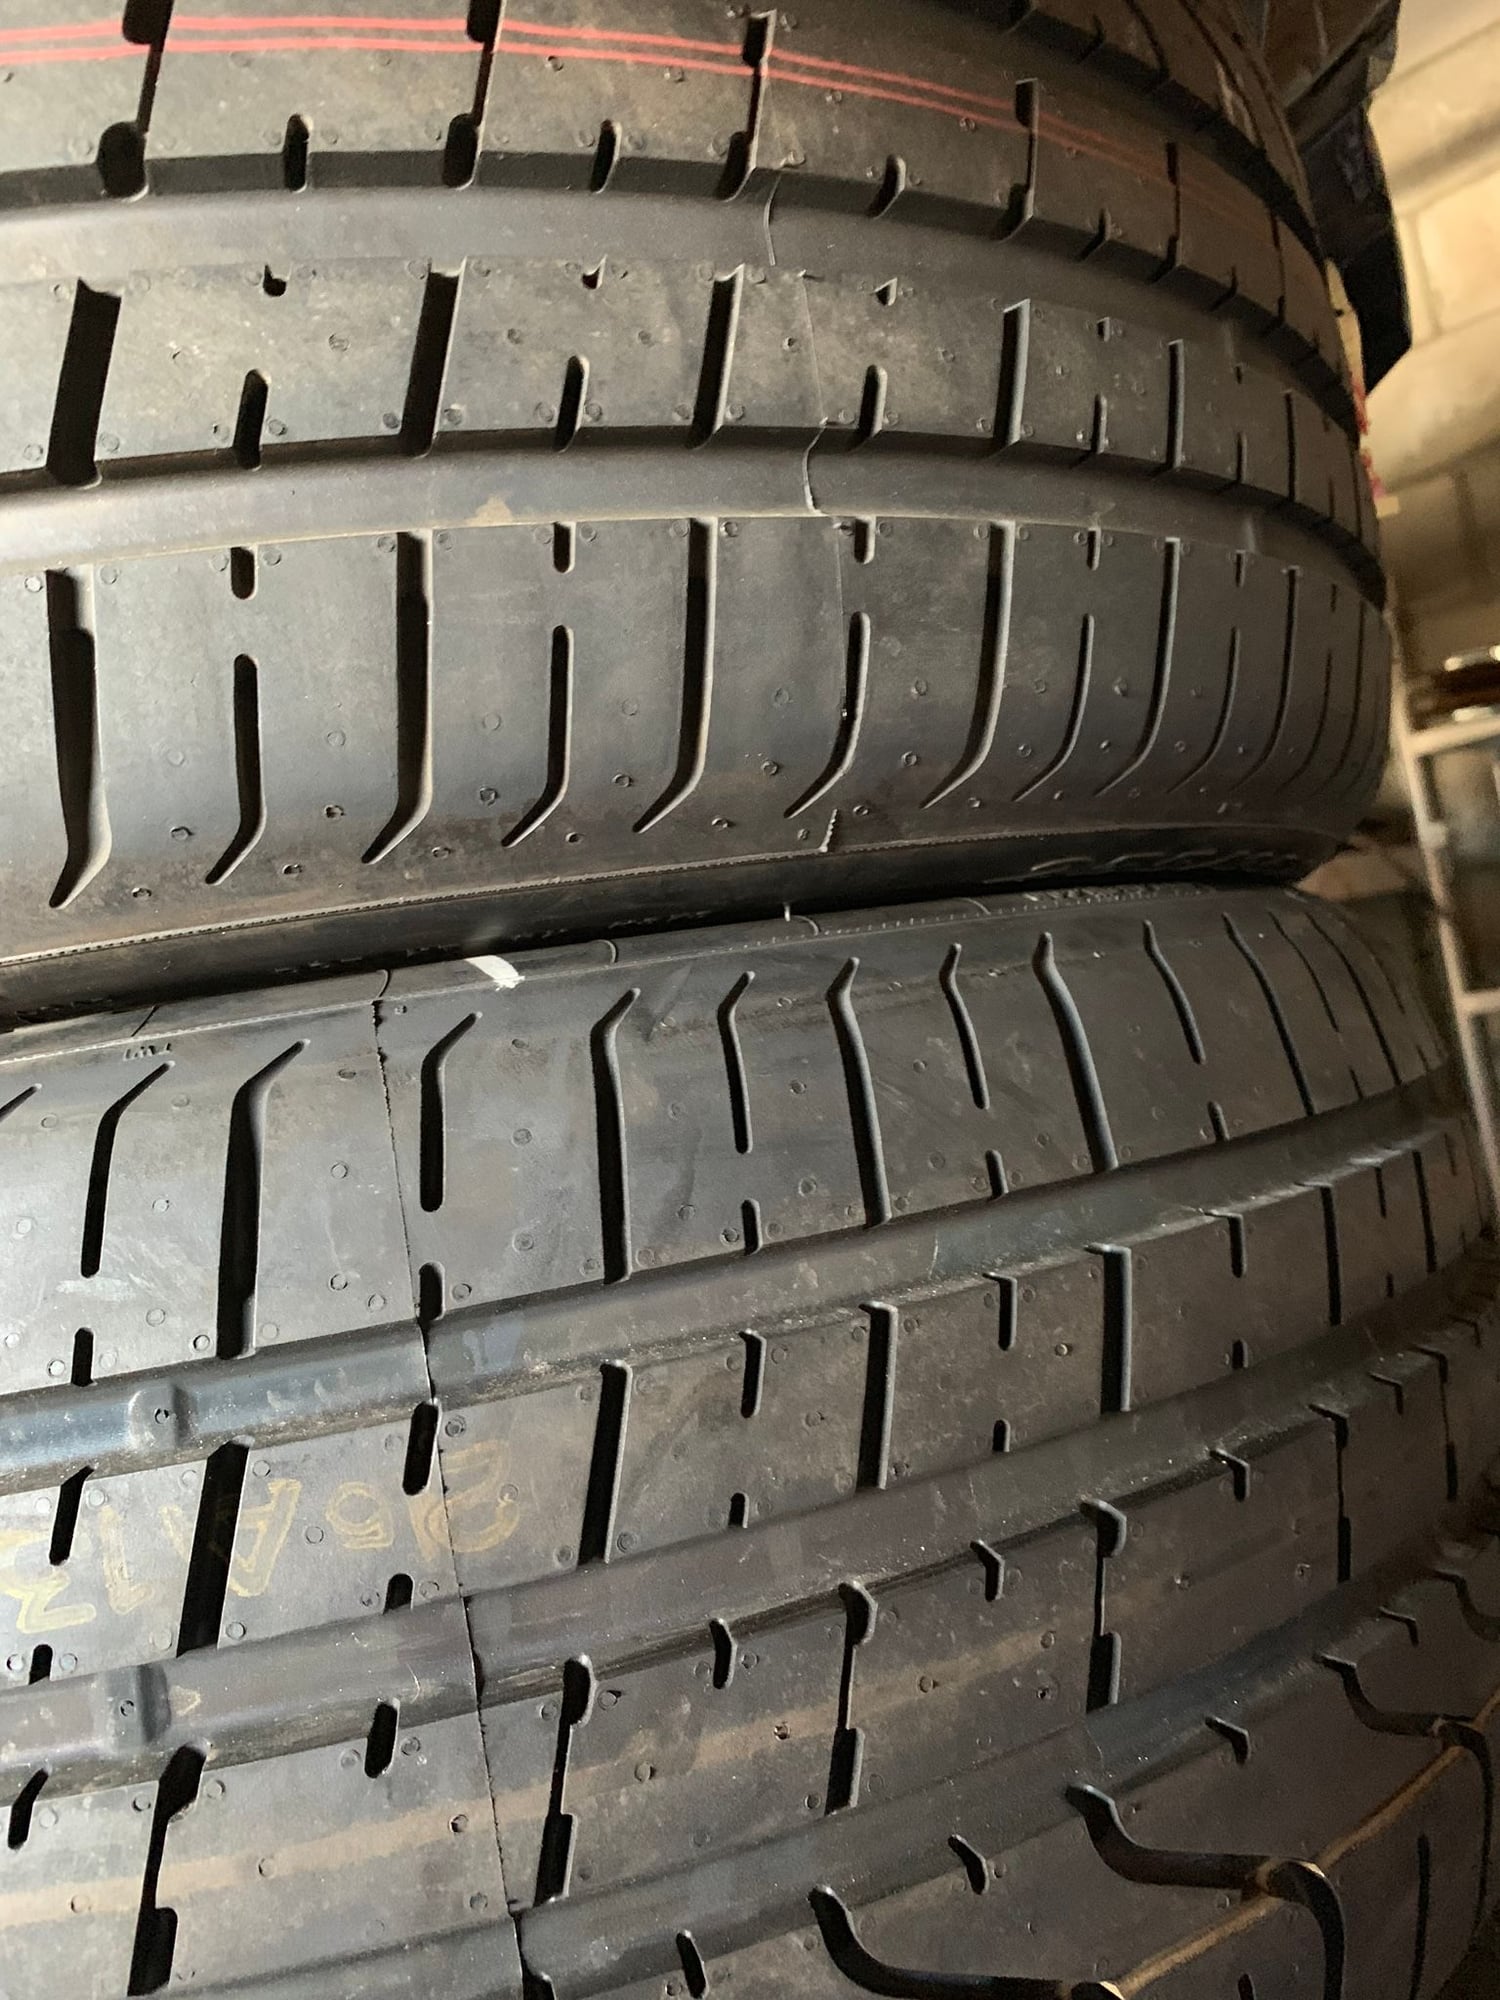 Wheels and Tires/Axles - Pair/two of New Pirelli P Zero 255/35/20ZR tires - Used - Gardena, CA 90247, United States